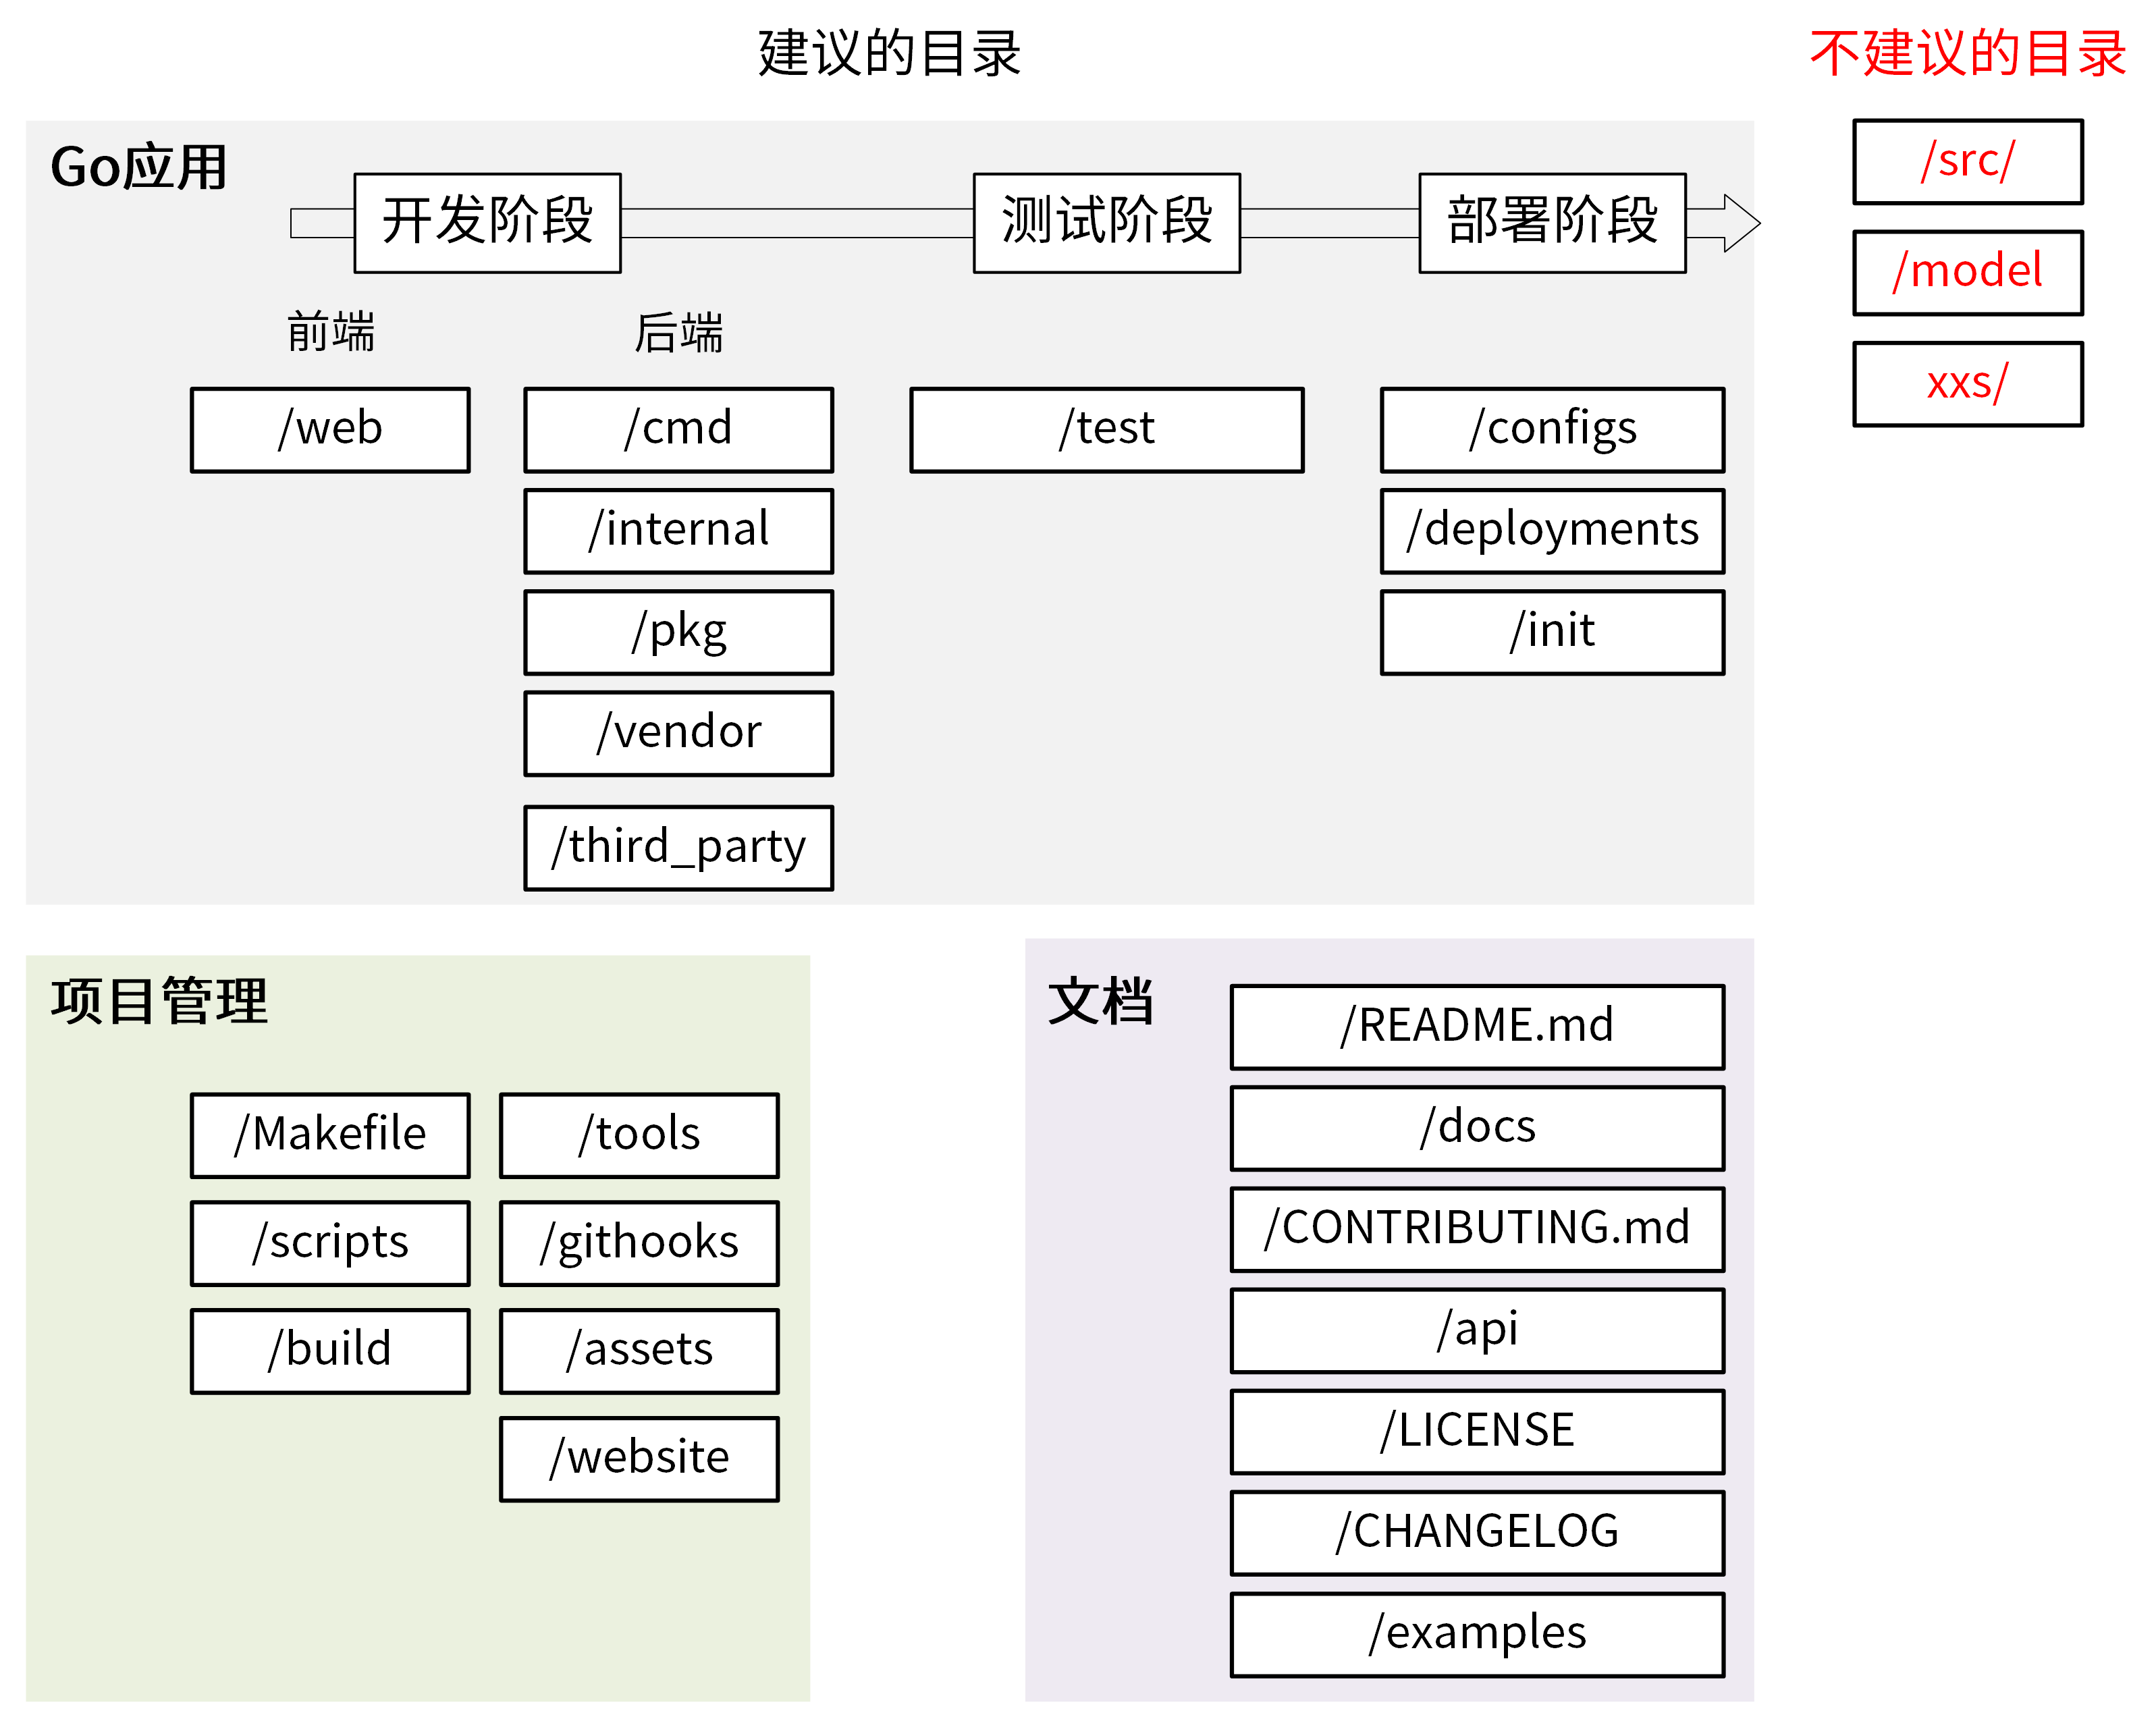 https://img.zhaoweiguo.com/knowledge/images/soft-engineerings/standard-catalog1.png